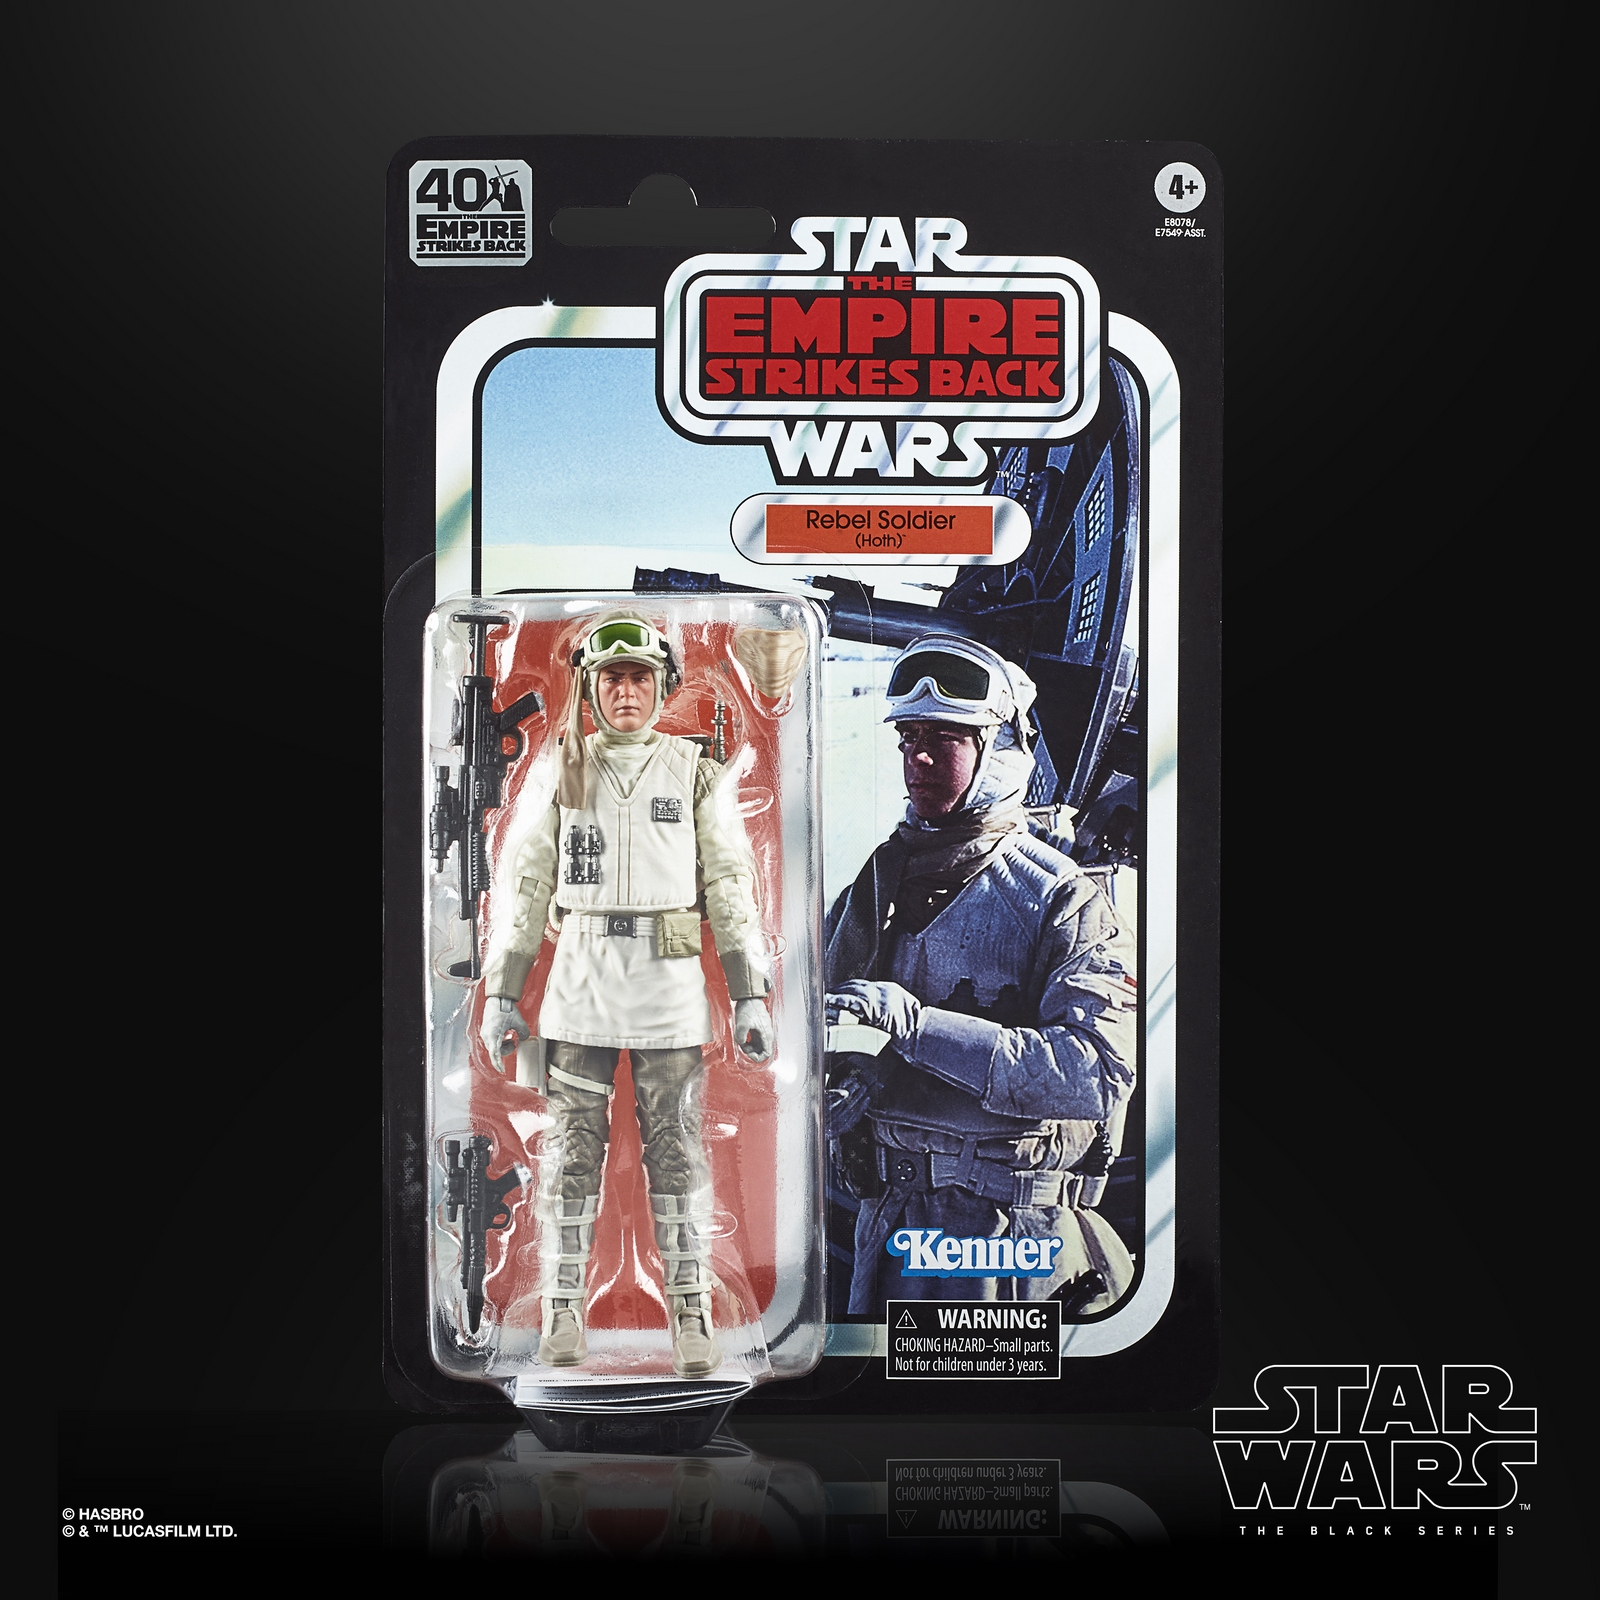 STAR-WARS-THE-BLACK-SERIES-40TH-ANNIVERSARY-6-INCH-REBEL-SOLDIER-(HOTH)---in-pck.jpg